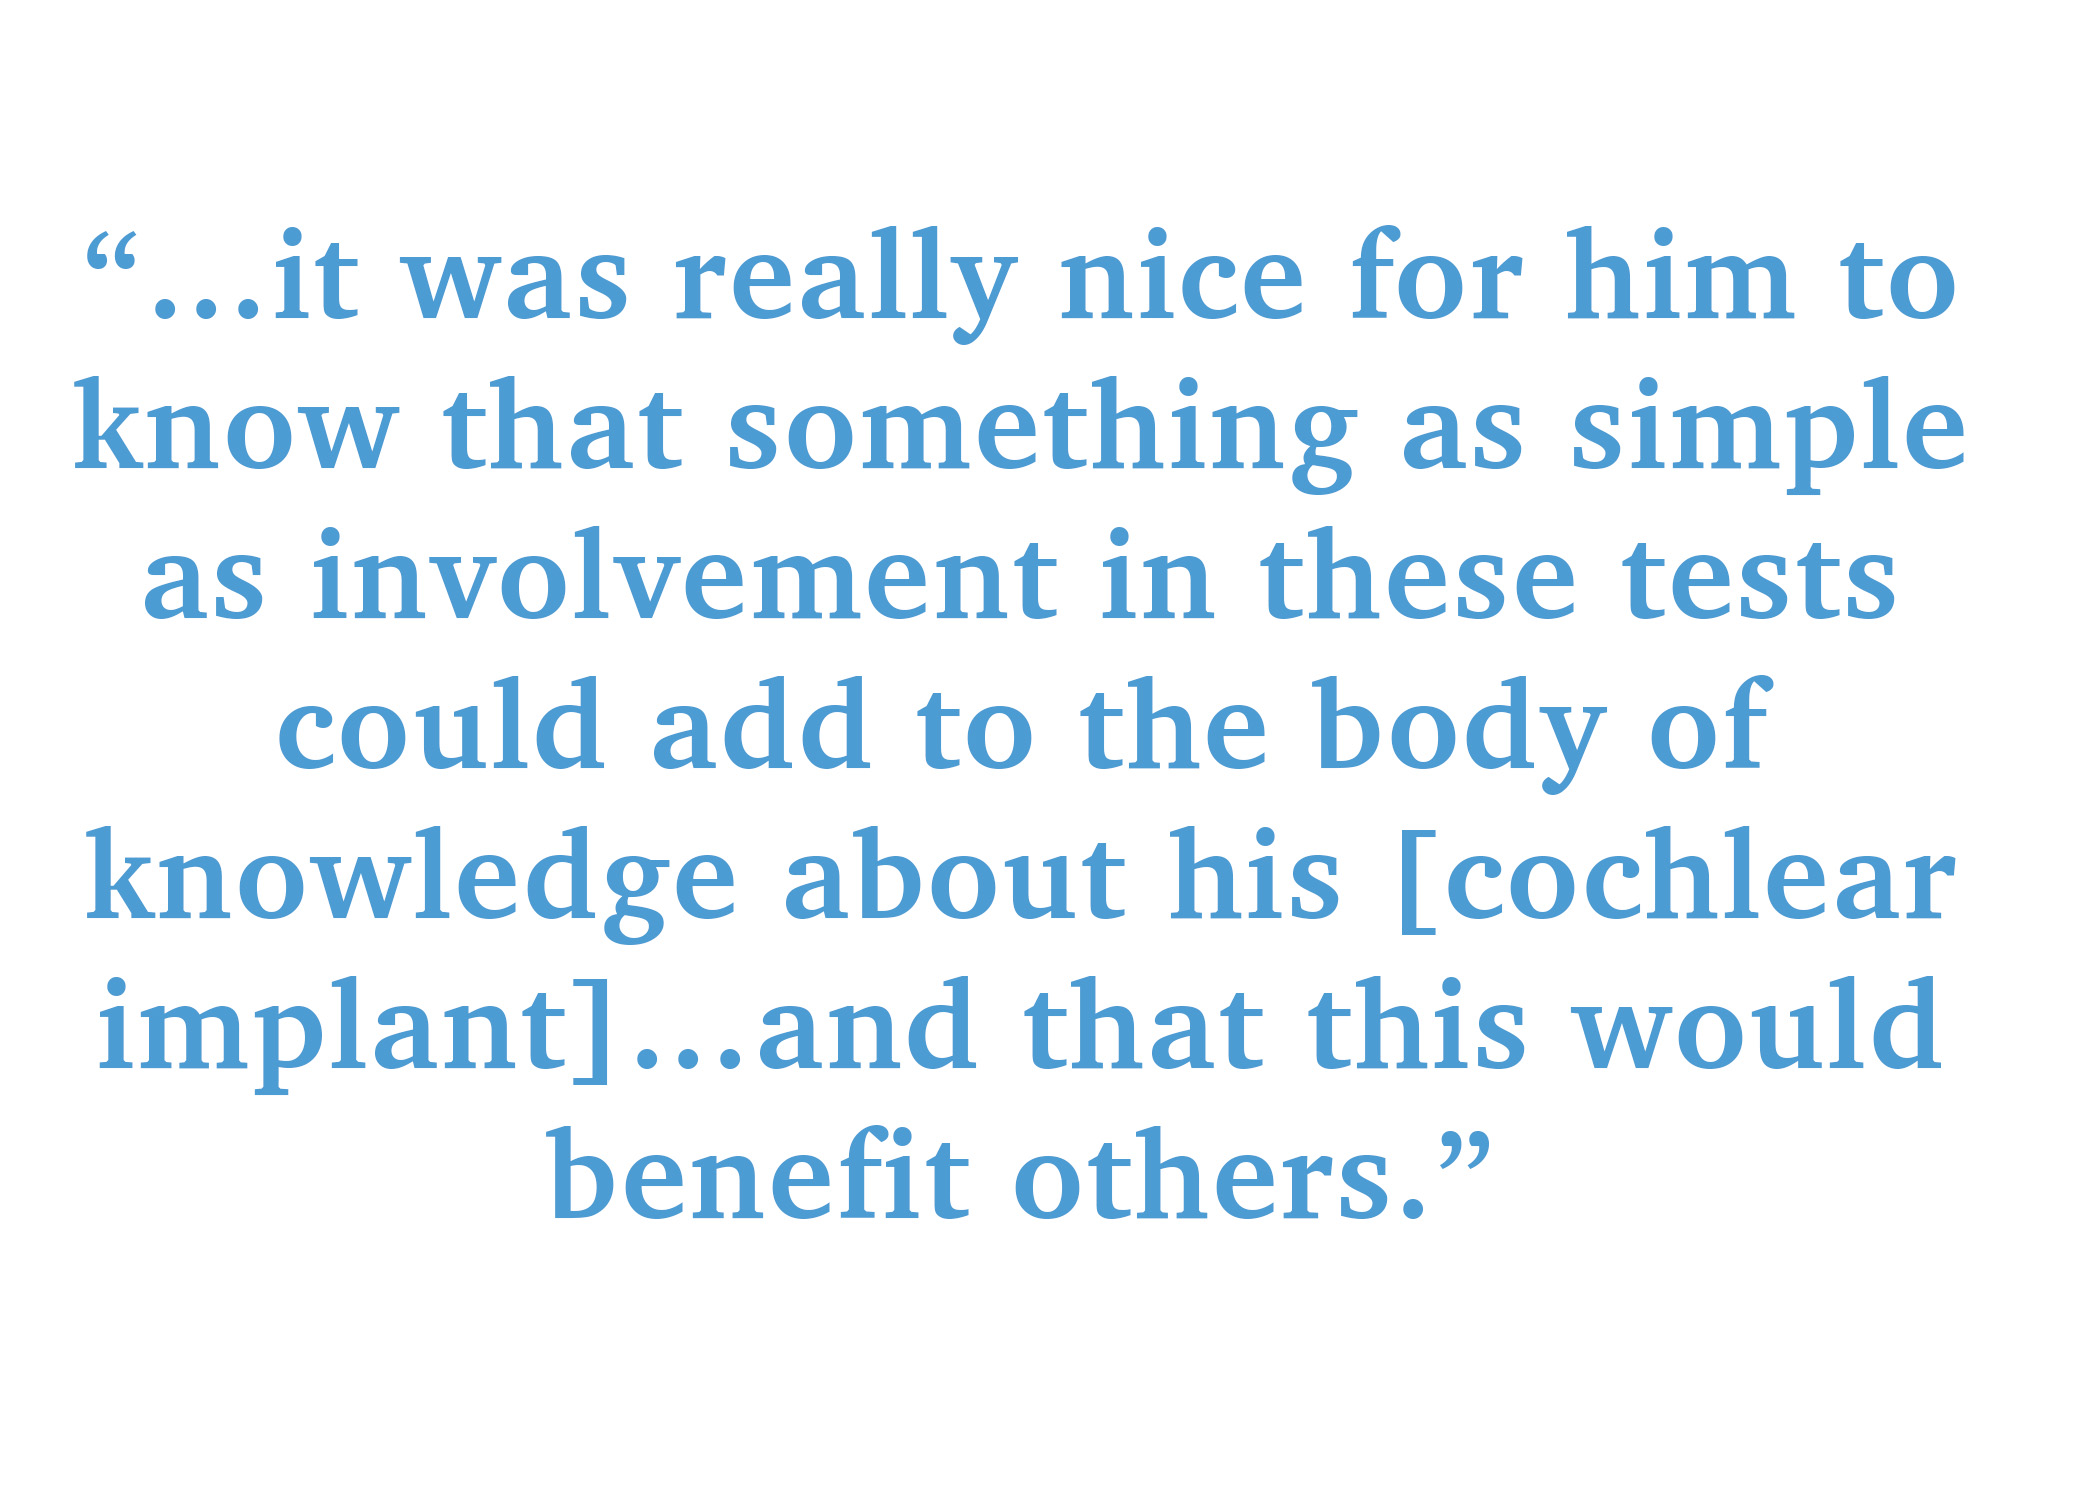 it was really nice for him to know that something as simple as involvement in these tests could add to the body of knowledge about his [cochlear implant]…and that this would benefit others.